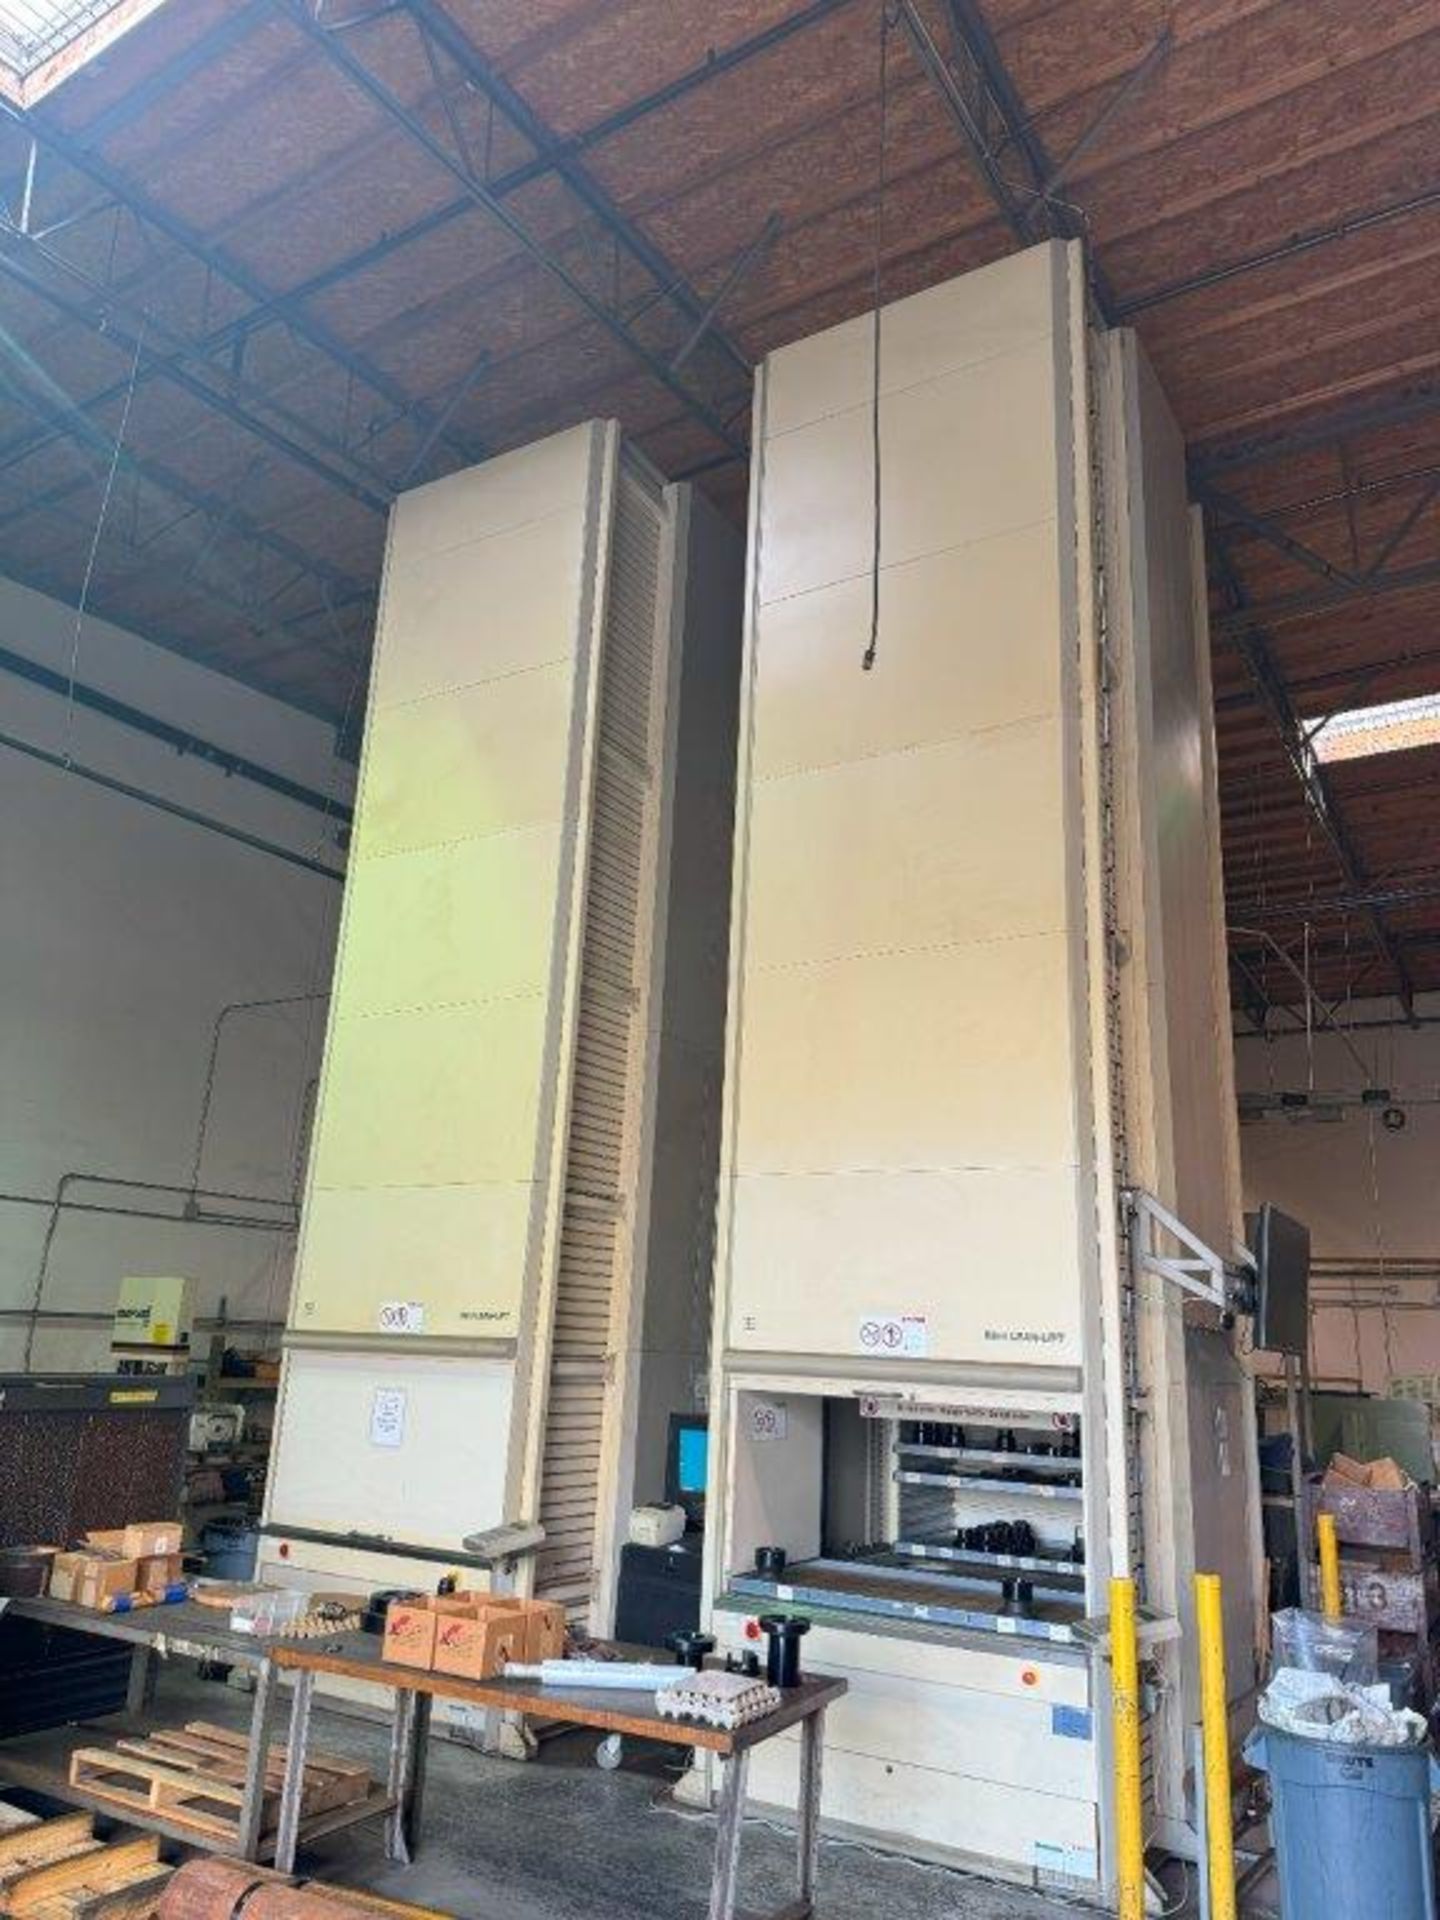 2006 HANEL LEAN LIFT MODEL 1640-825 VERTICAL LIFT MODULE, 68 TOTAL CONTAINER CAPACITY, 882 LBSMAX